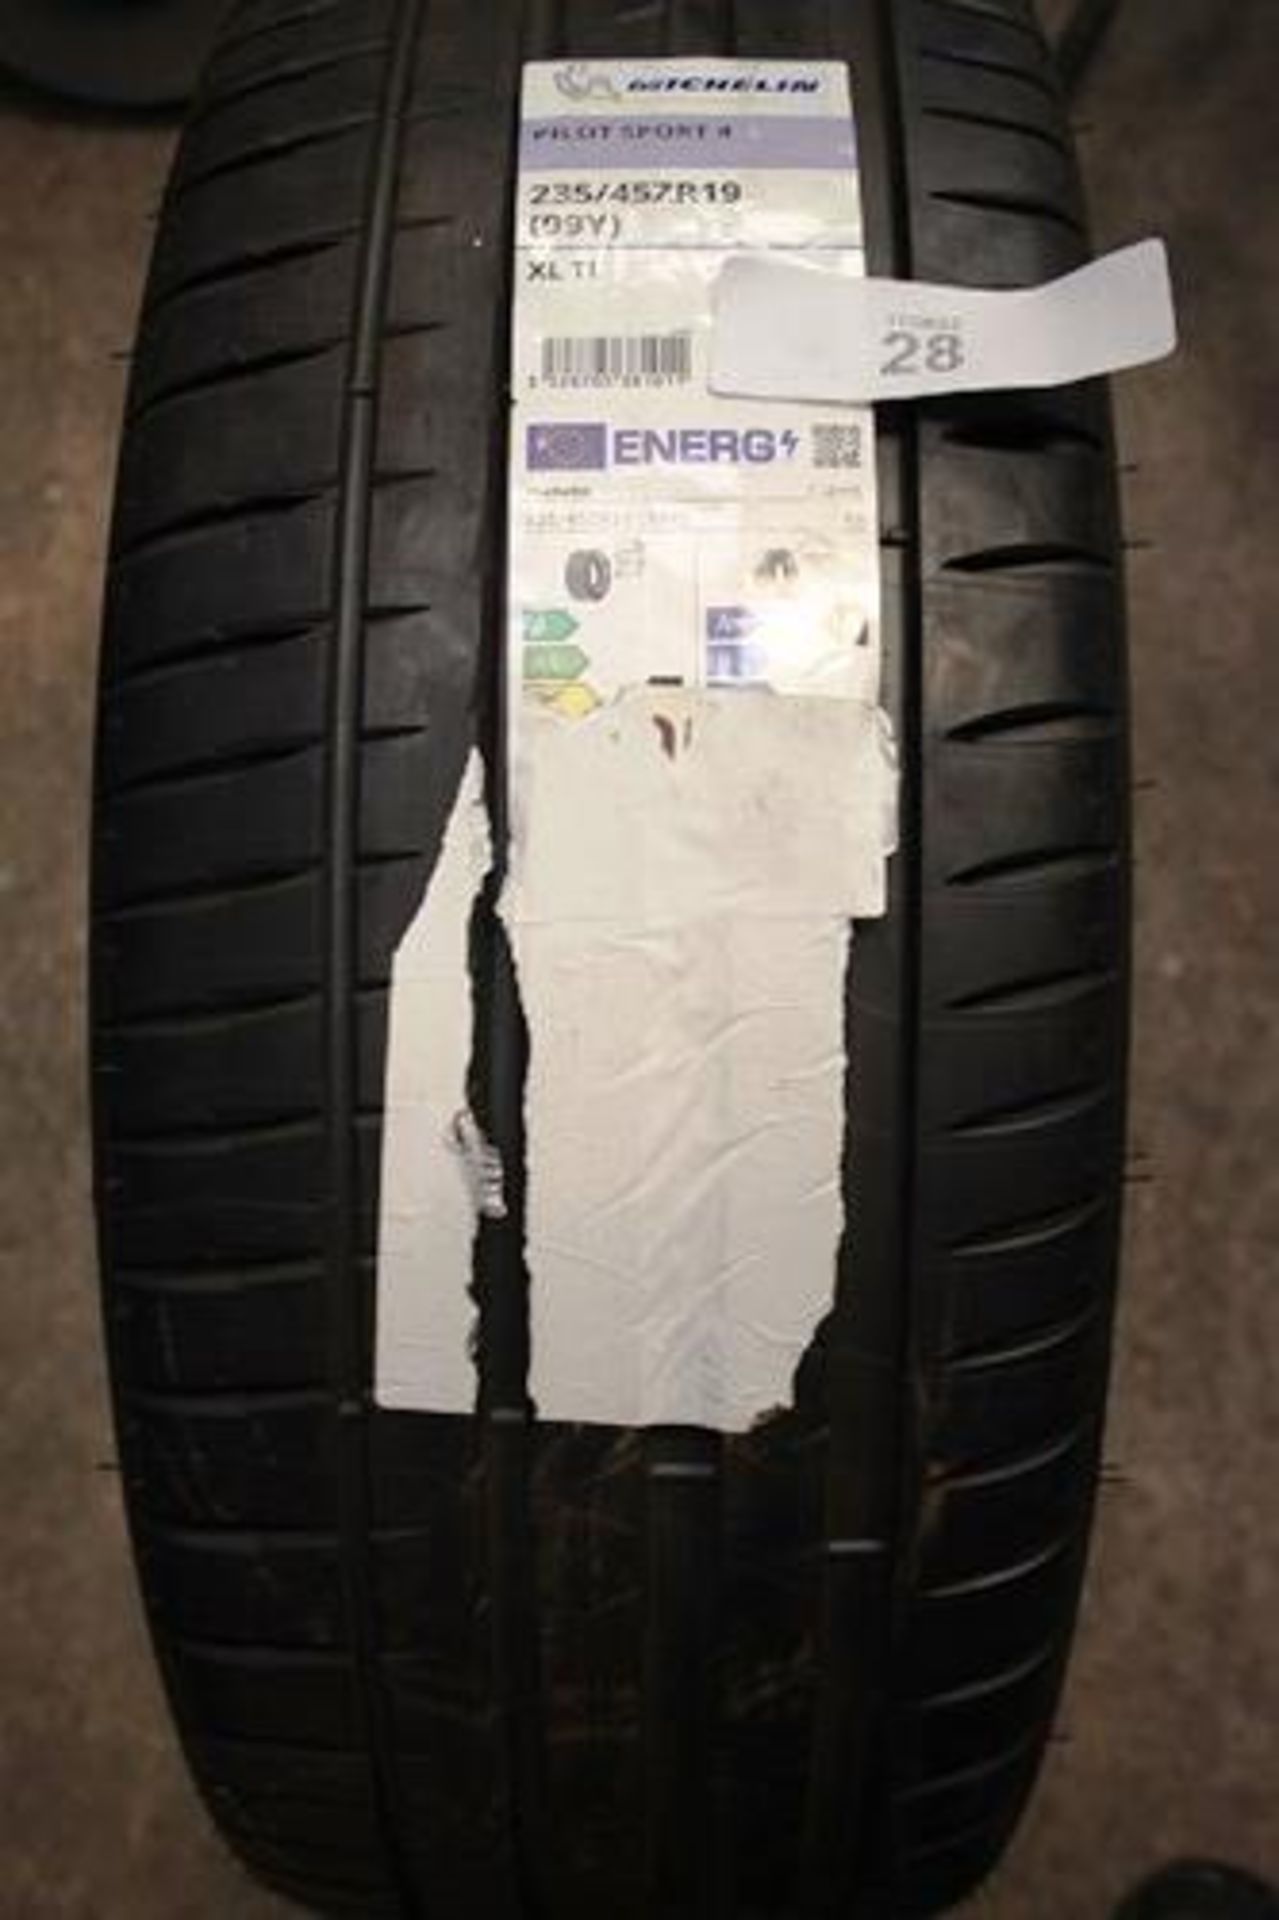 1 x Michelin Pilot Sport 4 tyre, size 235/45ZR19 94Y XL TL - New with labels (GS1)